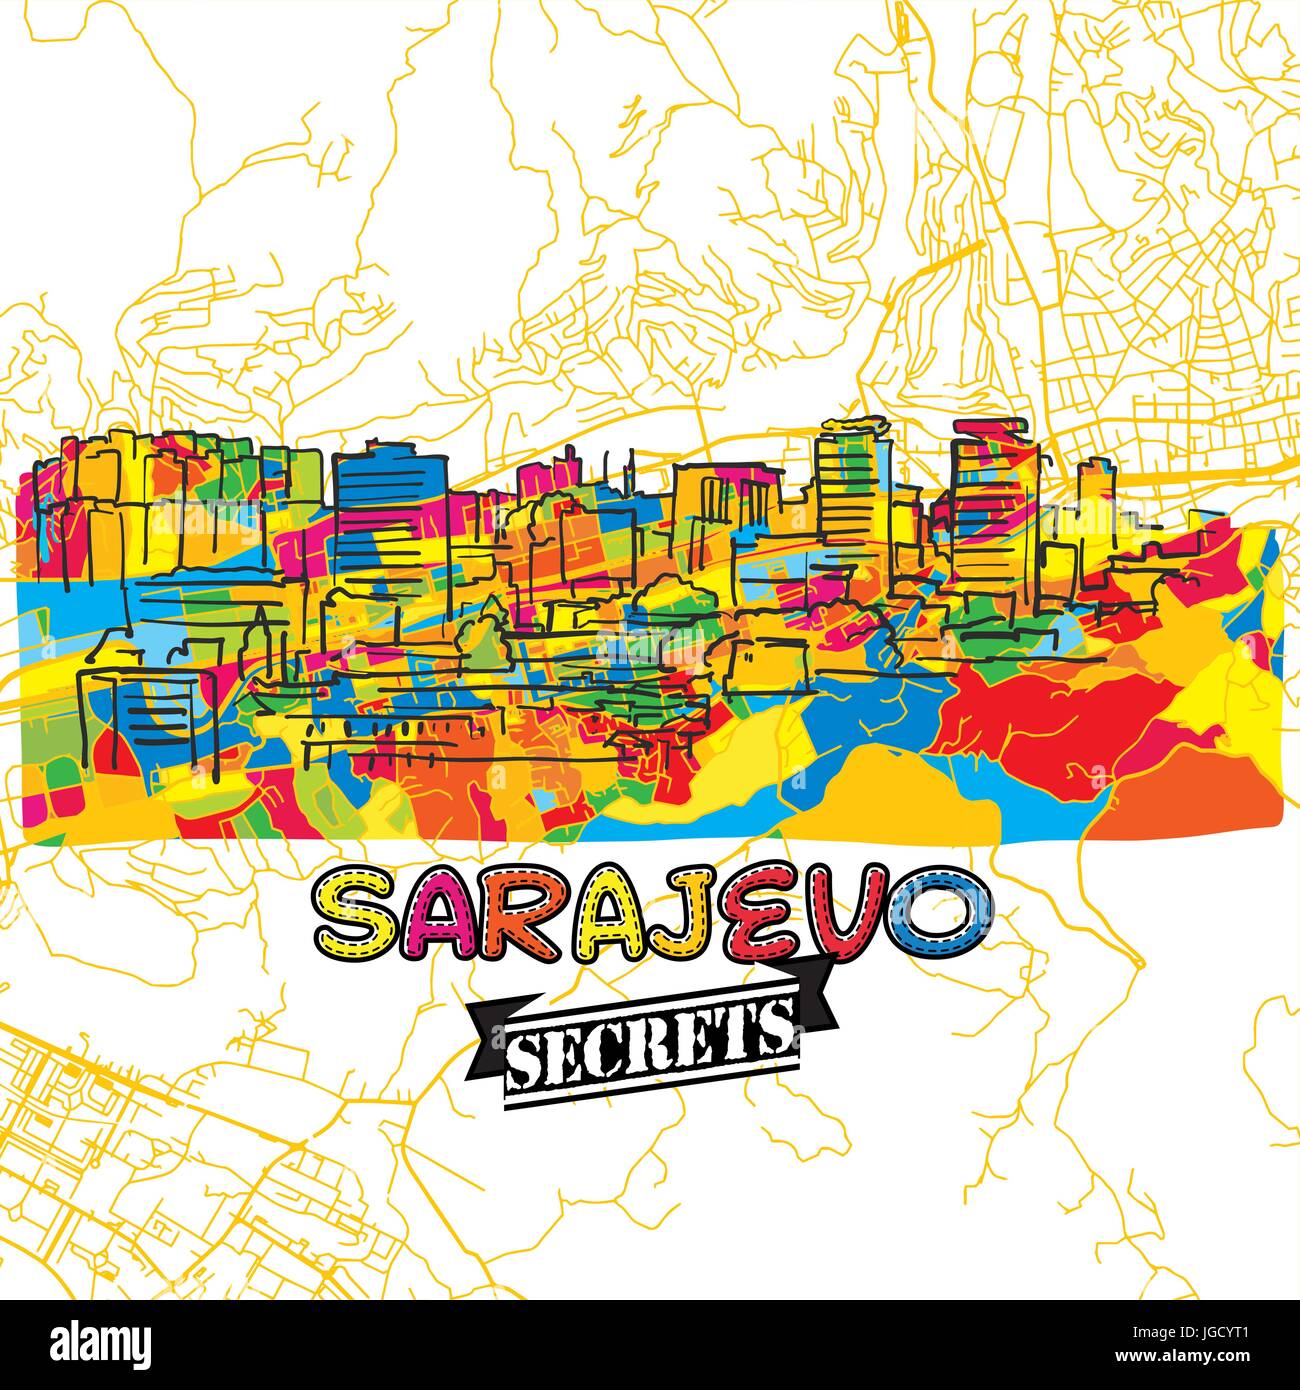 Sarajevo Travel Secrets Art Map for mapping experts and travel guides. Handmade city logo, typo badge and hand drawn vector image on top are grouped a Stock Vector